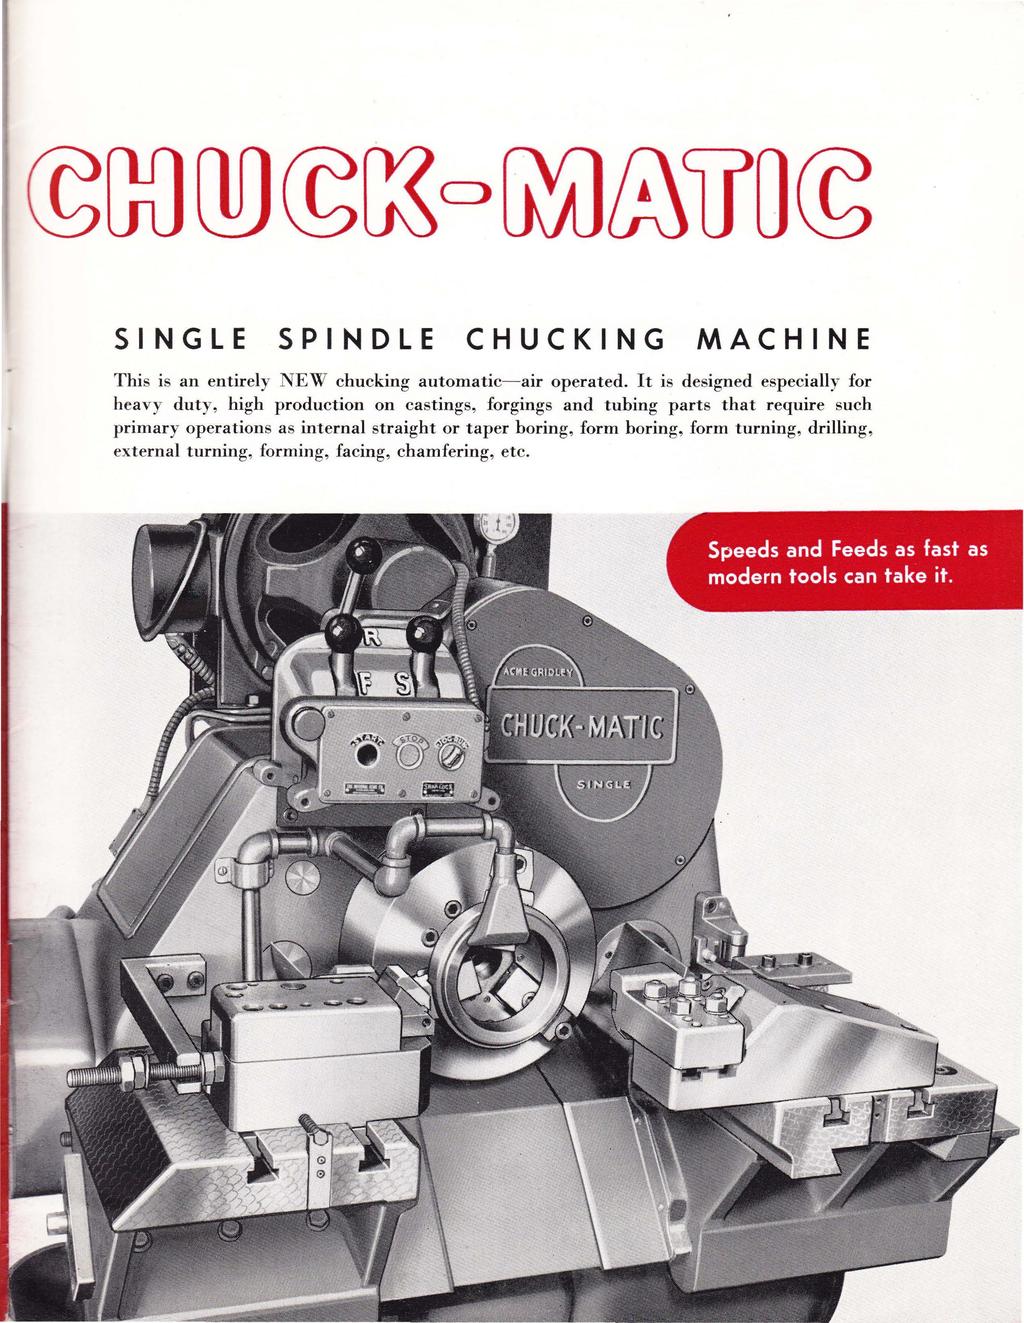 SINGLE SPINDLE CHUCKING MACHINE This is an entirely NEW chucking autmatic-air perated.